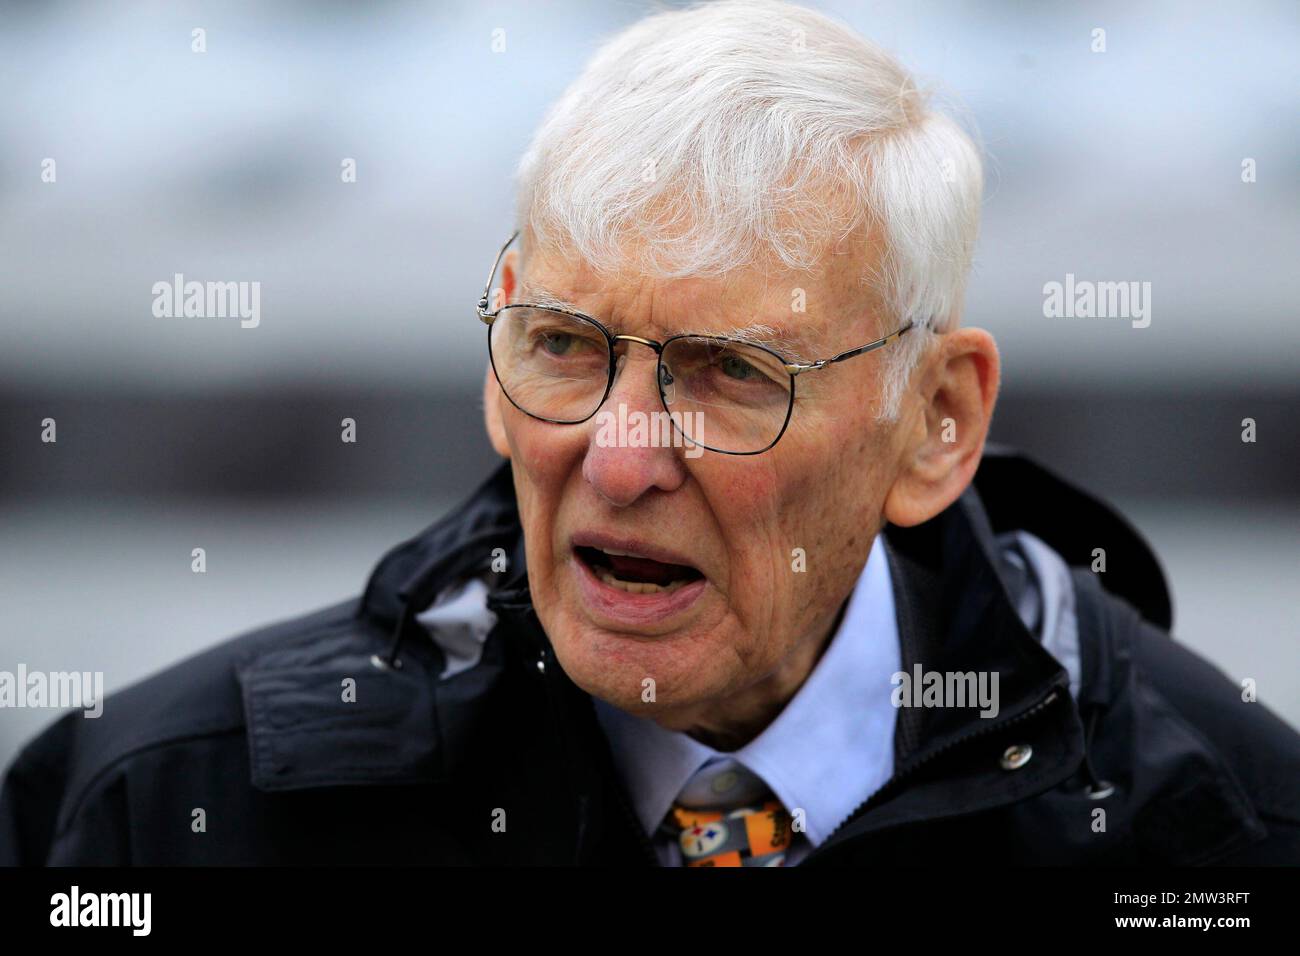 FILE - In this Oct. 7, 2012, file photo Dan Rooney watches warm ups before an NFL football game between the Pittsburgh Steelers and Philadelphia Eagles in Pittsburgh. The Steelers announced Mr. Rooney died Thursday, Apr. 13, 2017. He was 84. (AP Photo/Gene J. Puskar, File) Banque D'Images